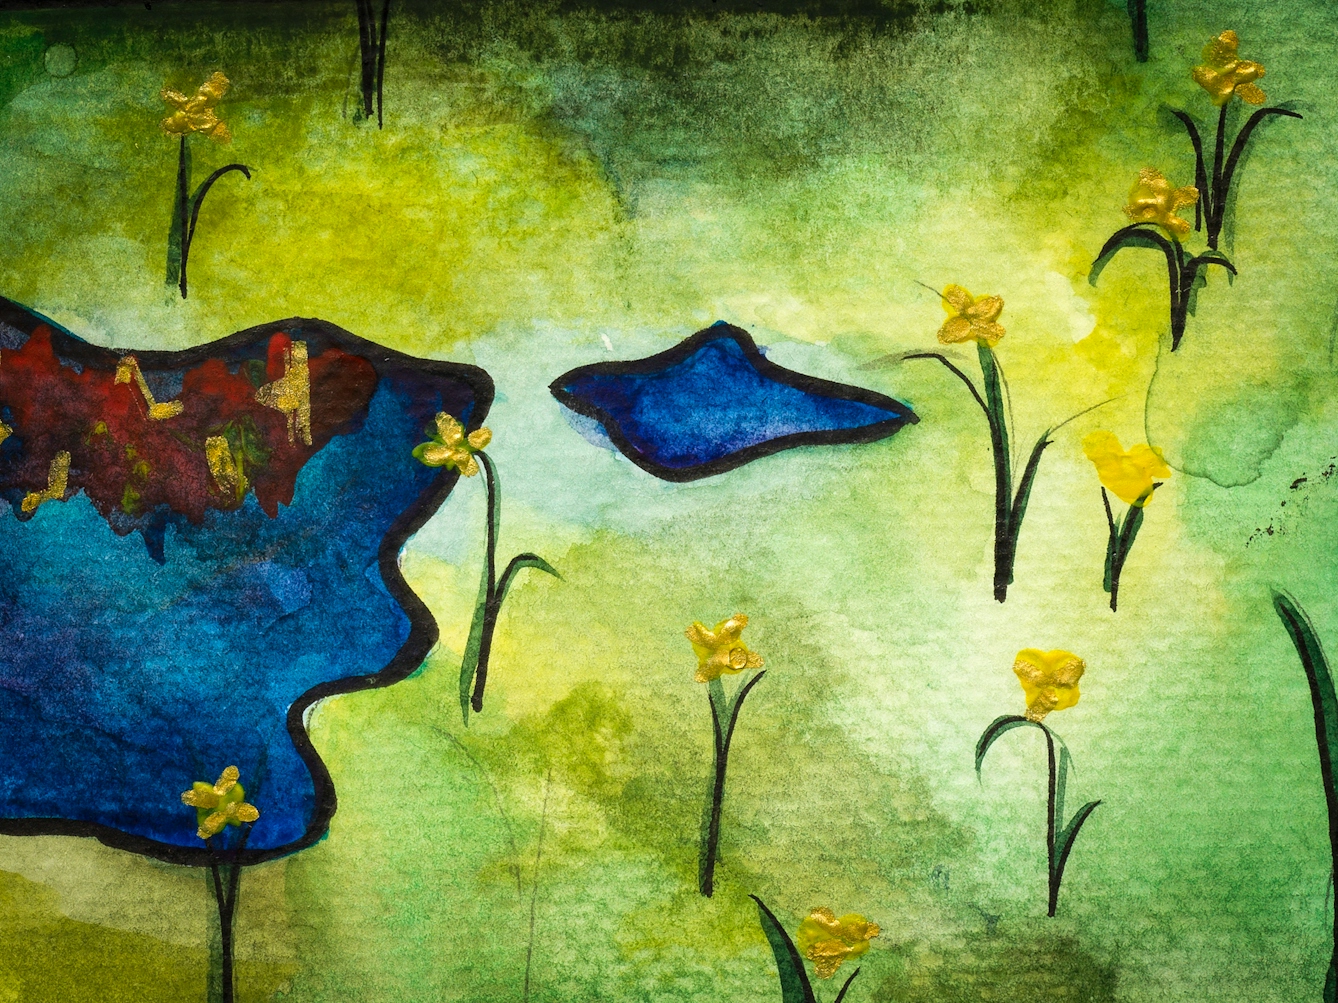 Detail from a larger colourful artwork. The artwork shows grass with flowers growing in it and a small pond to the left. 